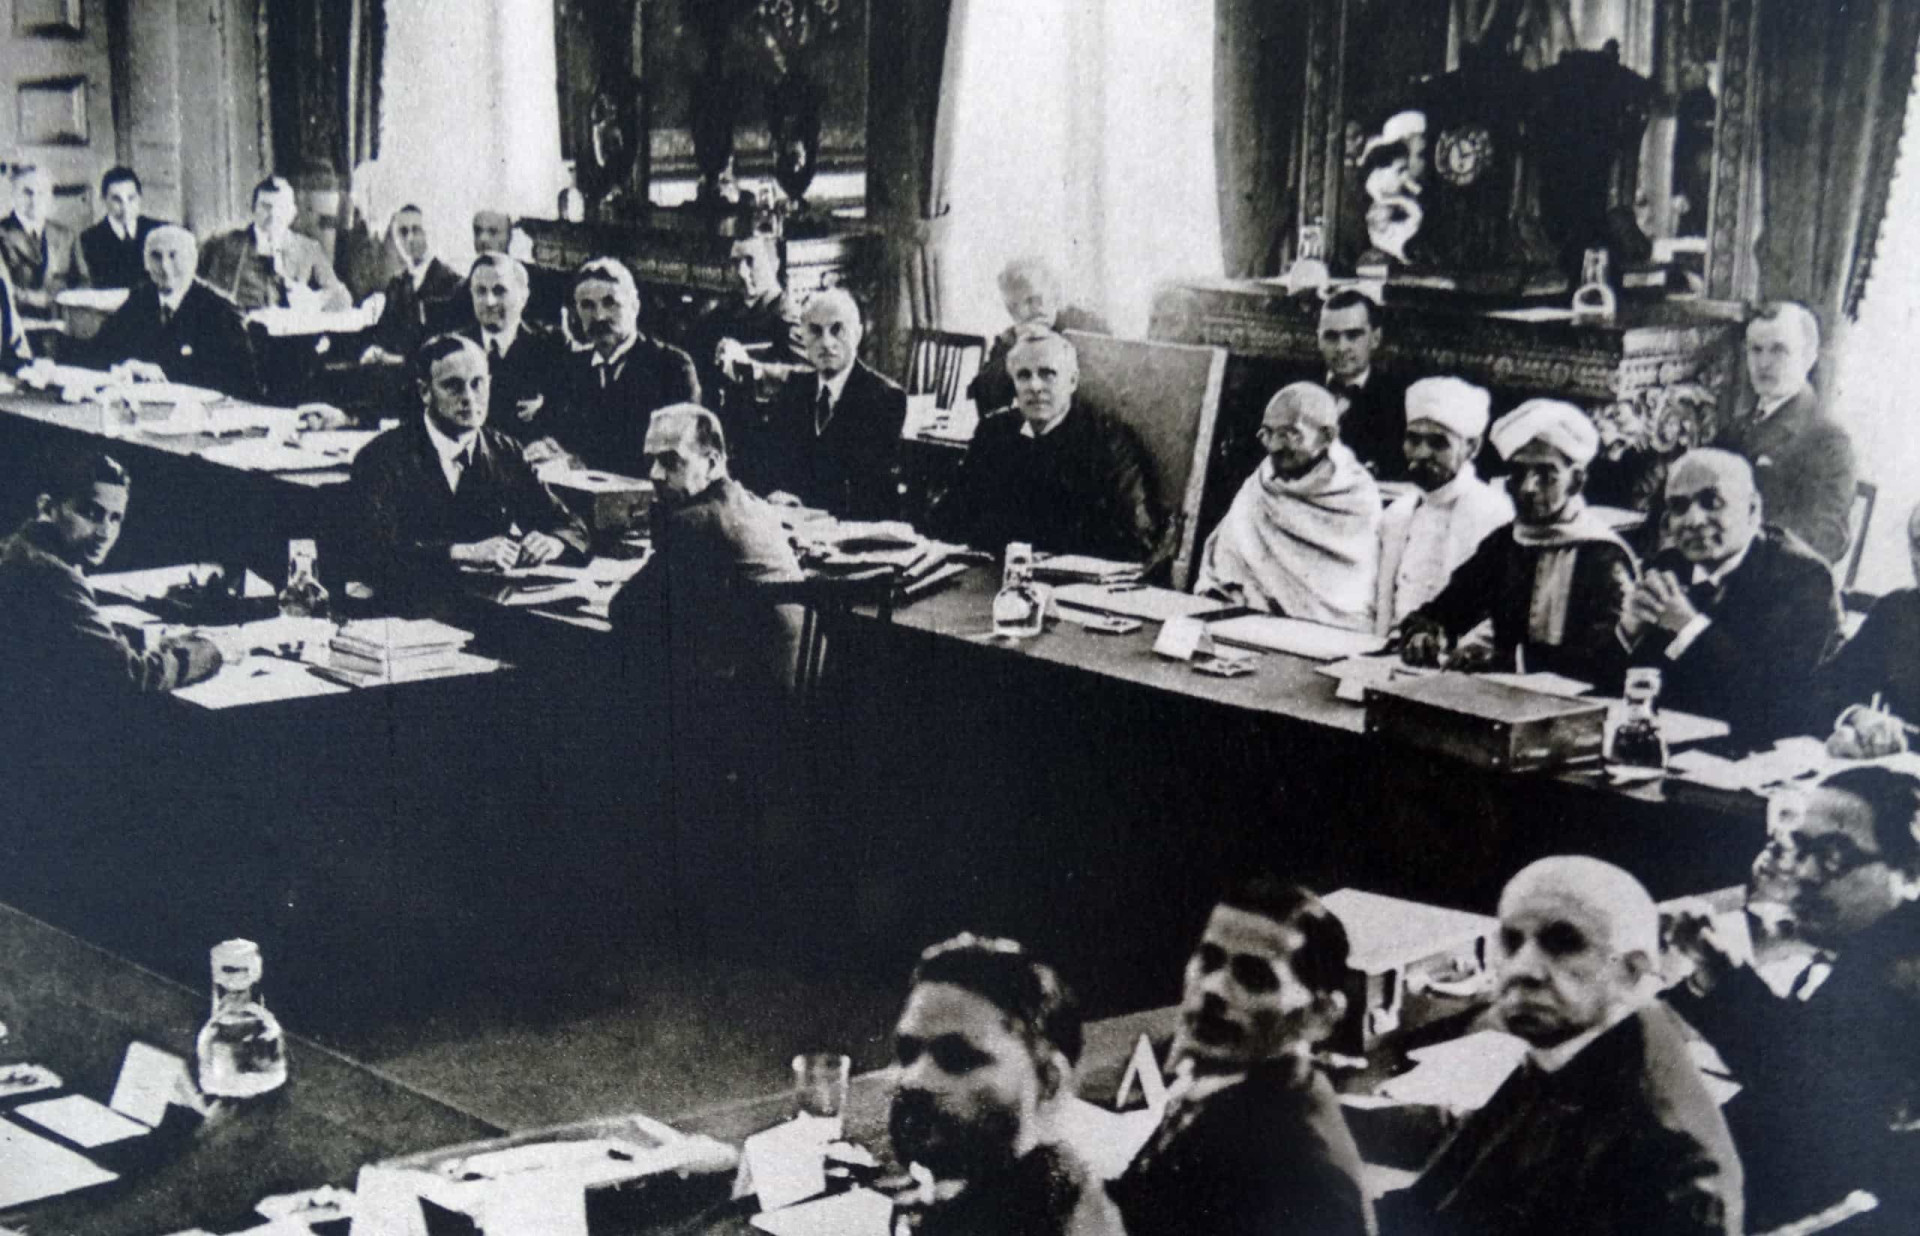 <p>The conference ended with a settlement being reached between Gandhi and Viceroy Lord Irwin known as the Gandhi-Irwin Pact. The British Government agreed to free all political prisoners, in return for the suspension of the civil disobedience movement. For his part, Conservative politician Winston Churchill remained critical of Gandhi, accusing him of playing on the ignorance of the Indian masses and even describing him as a dictator. </p><p>You may also like:<a href="https://www.starsinsider.com/n/464128?utm_source=msn.com&utm_medium=display&utm_campaign=referral_description&utm_content=447666v5en-us"> Celebs attacked by animals</a></p>